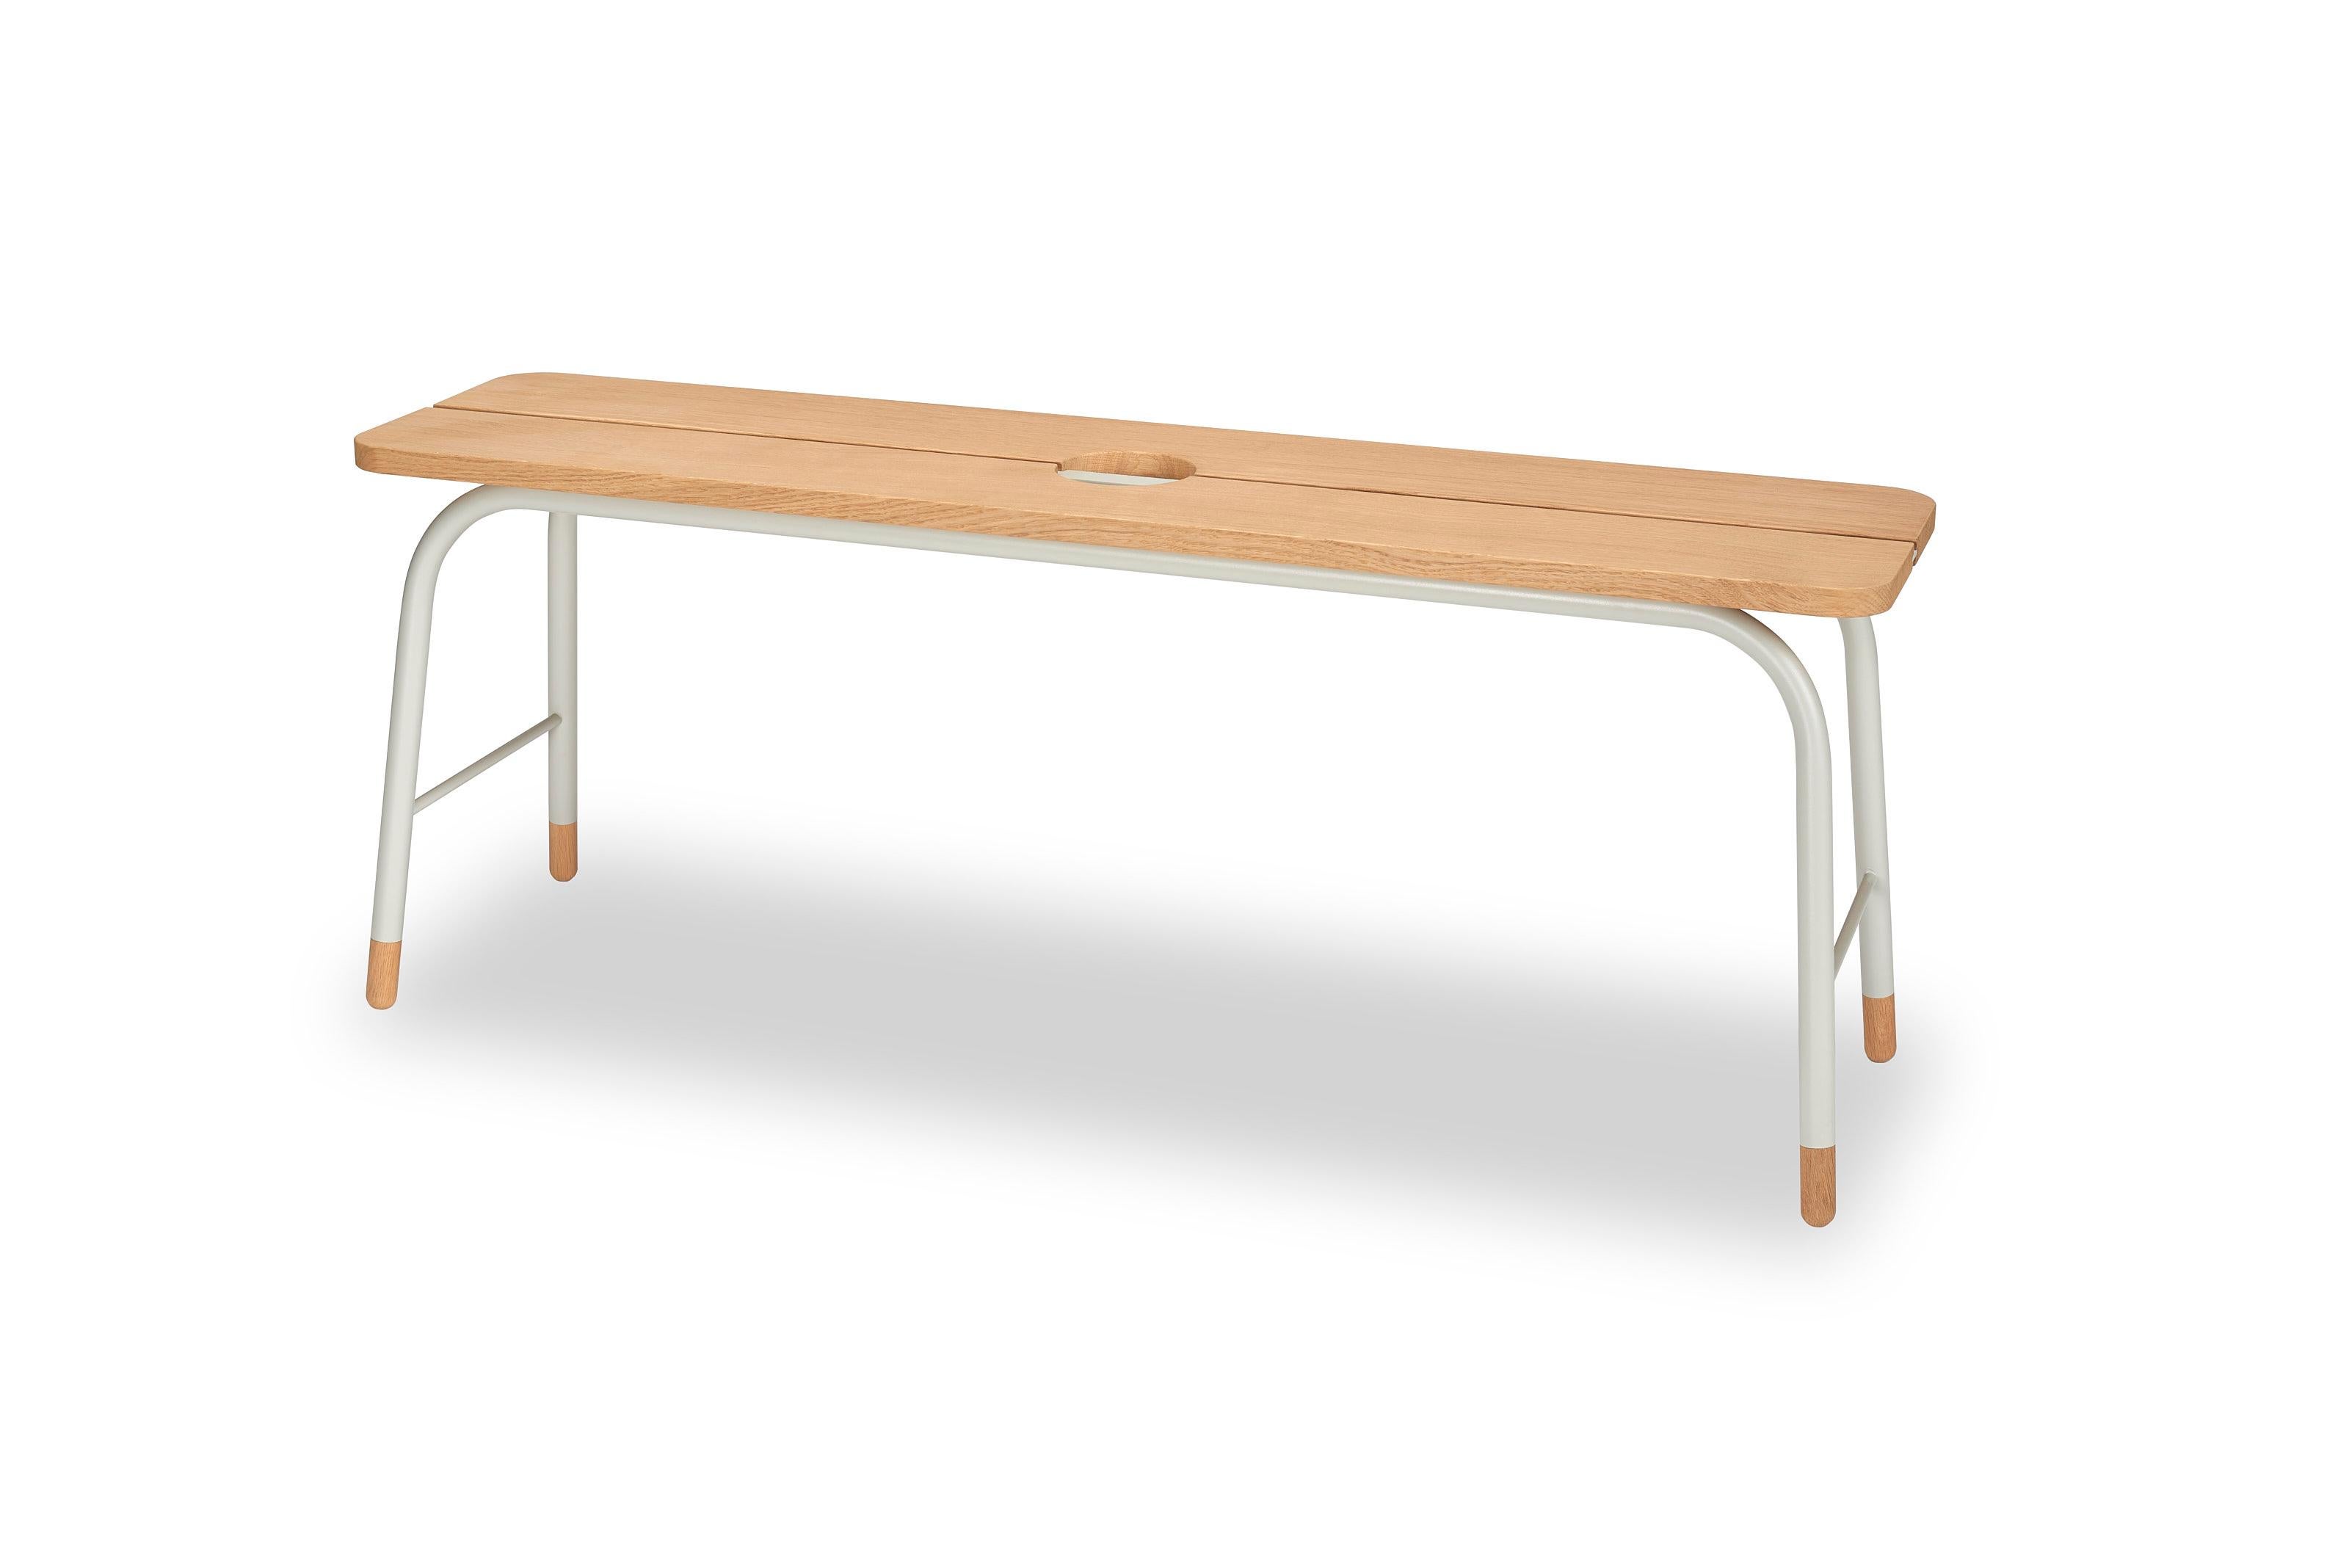 Saw bench was inspired by a bench which Steven Banken build at young age in the workshop of his grandfather. A usefull bench with a sturdy handle in the middle to carry it around. the design originally started in the Tannic Acid project, but is now